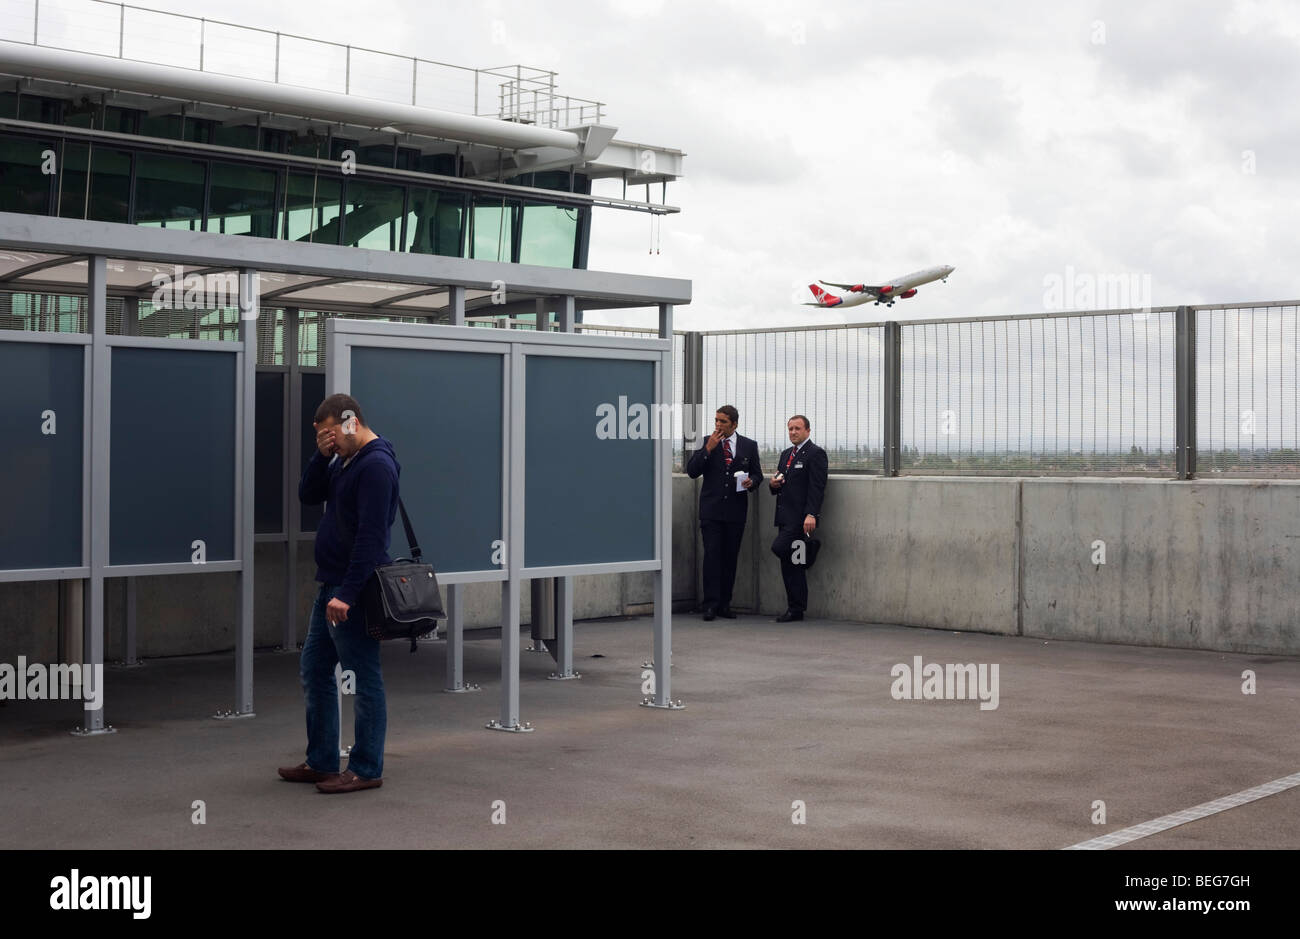 As a Virgin jet takes off overhead, airline employees stop for a cigarette break near the smoking shelter at Heathrow's T5. Stock Photo